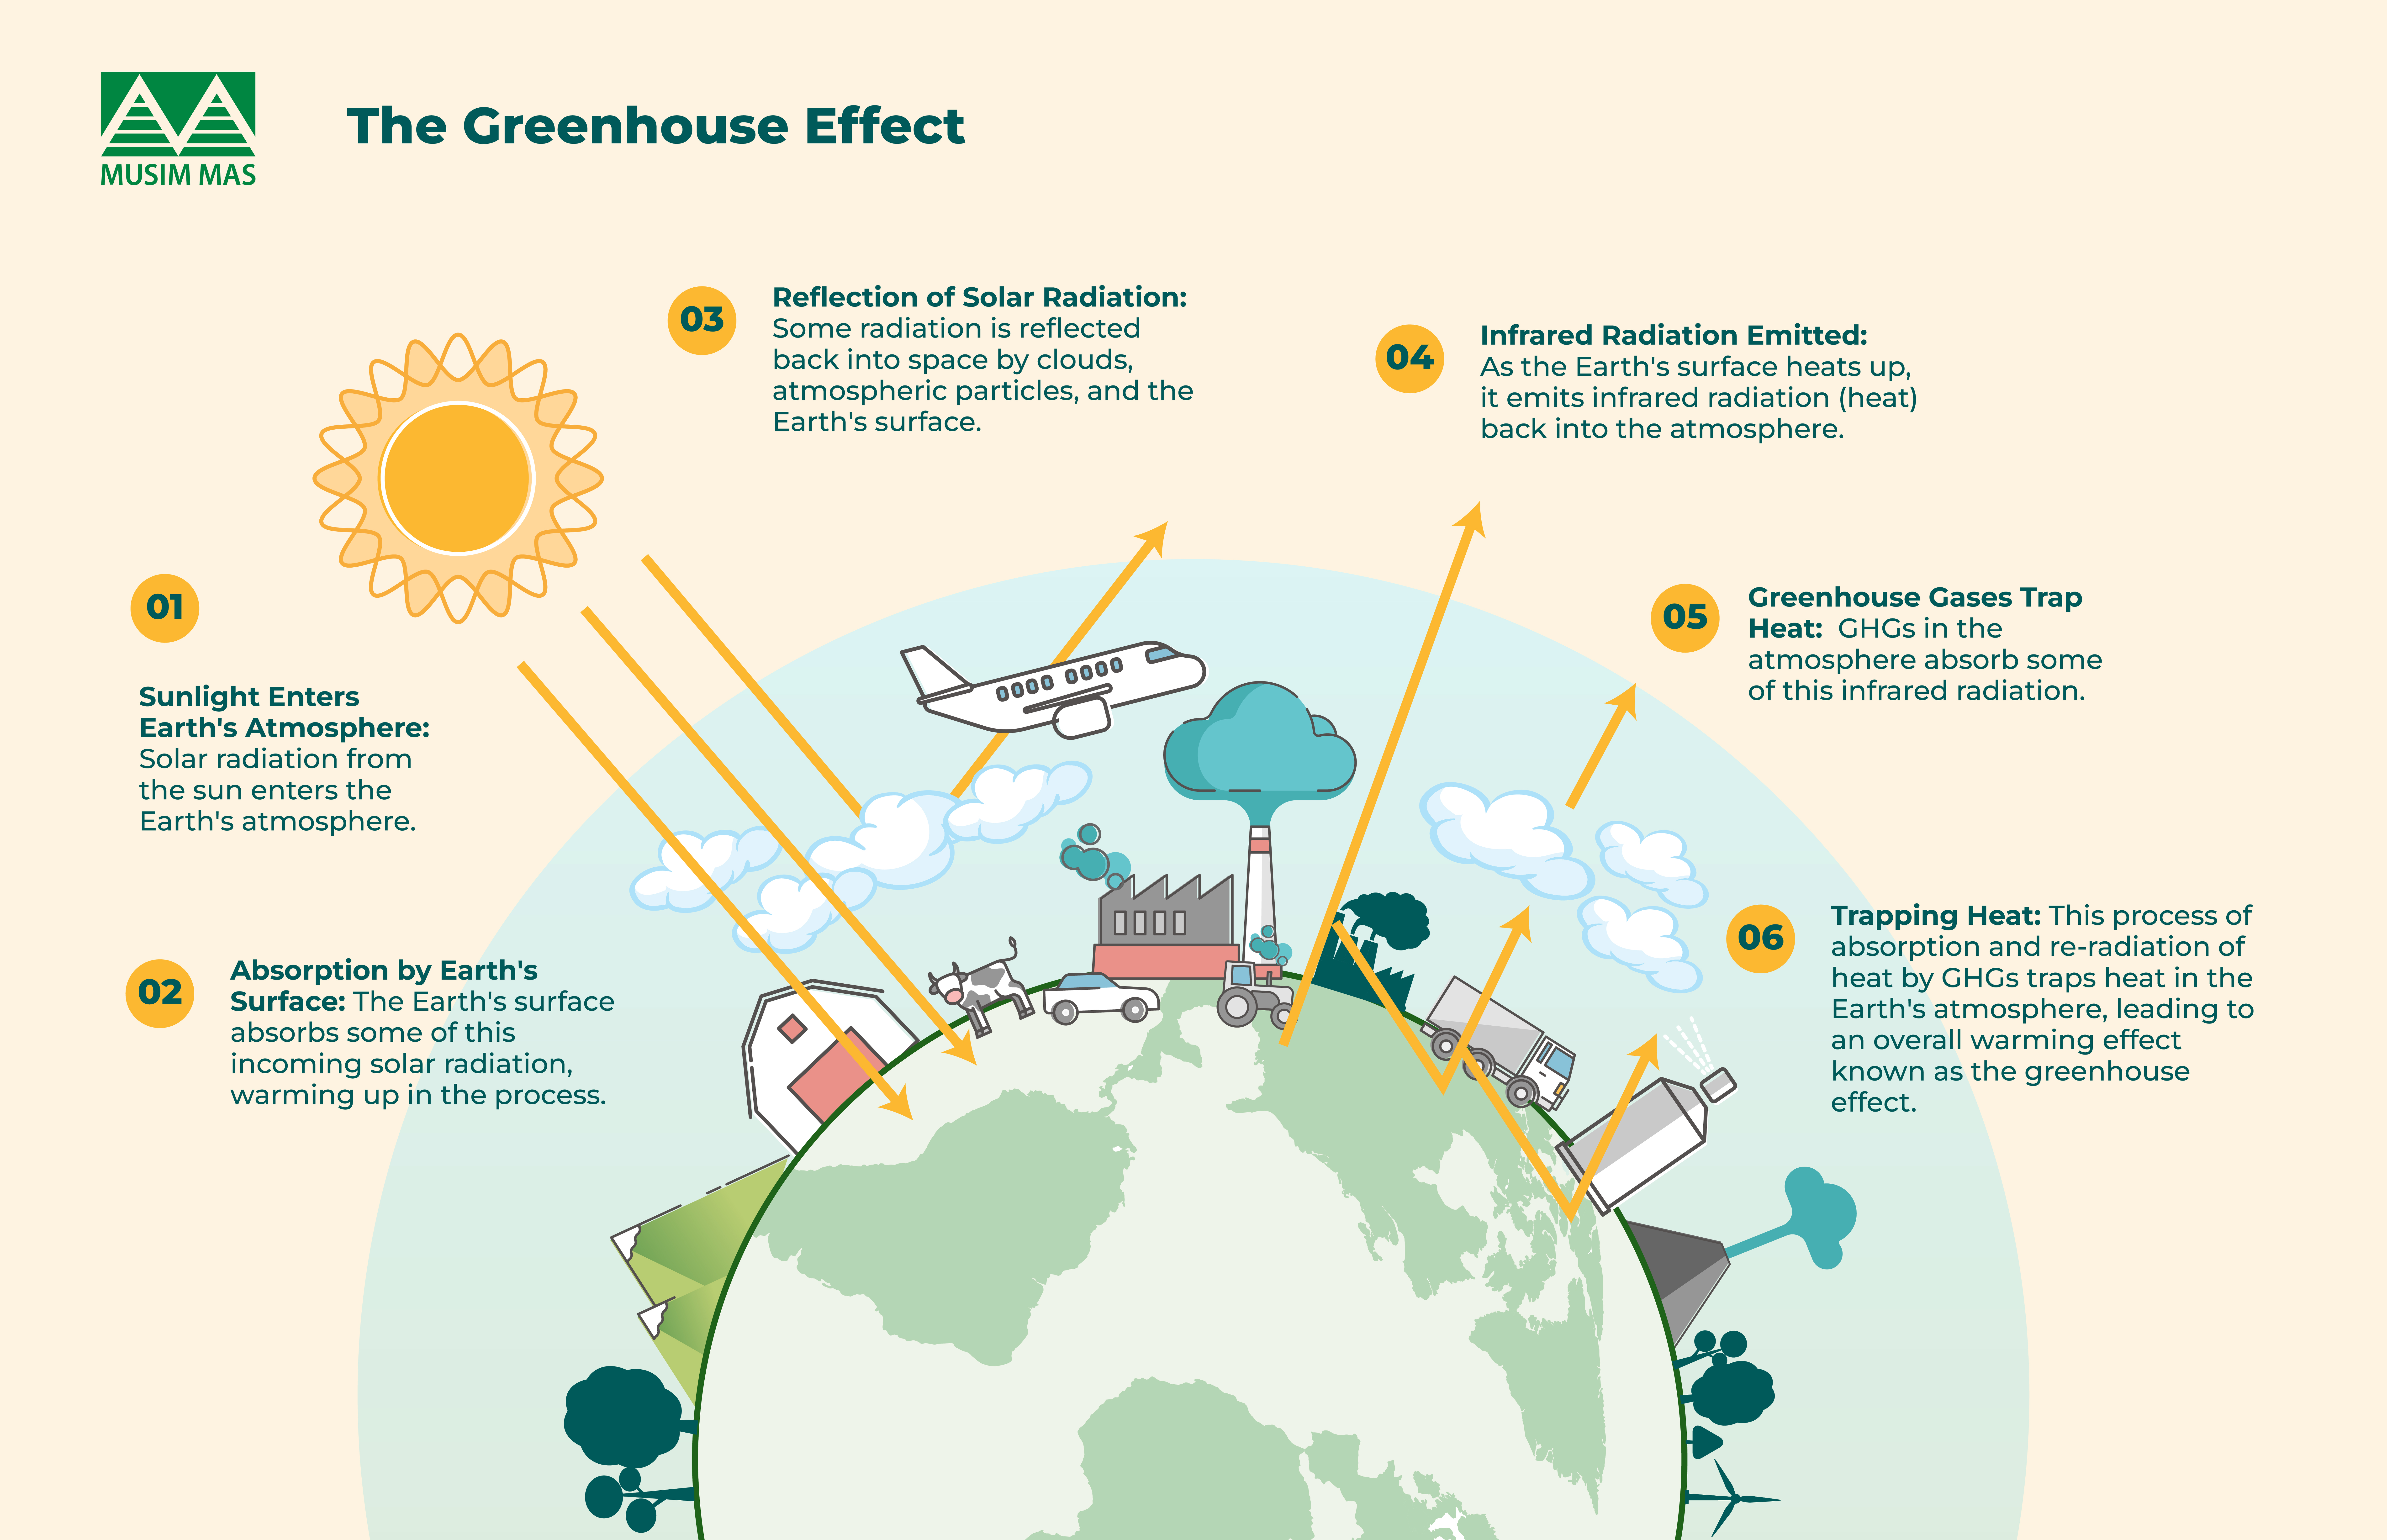 What Are Greenhouse Gases (GHGs), and How Do They Cause Climate Change?